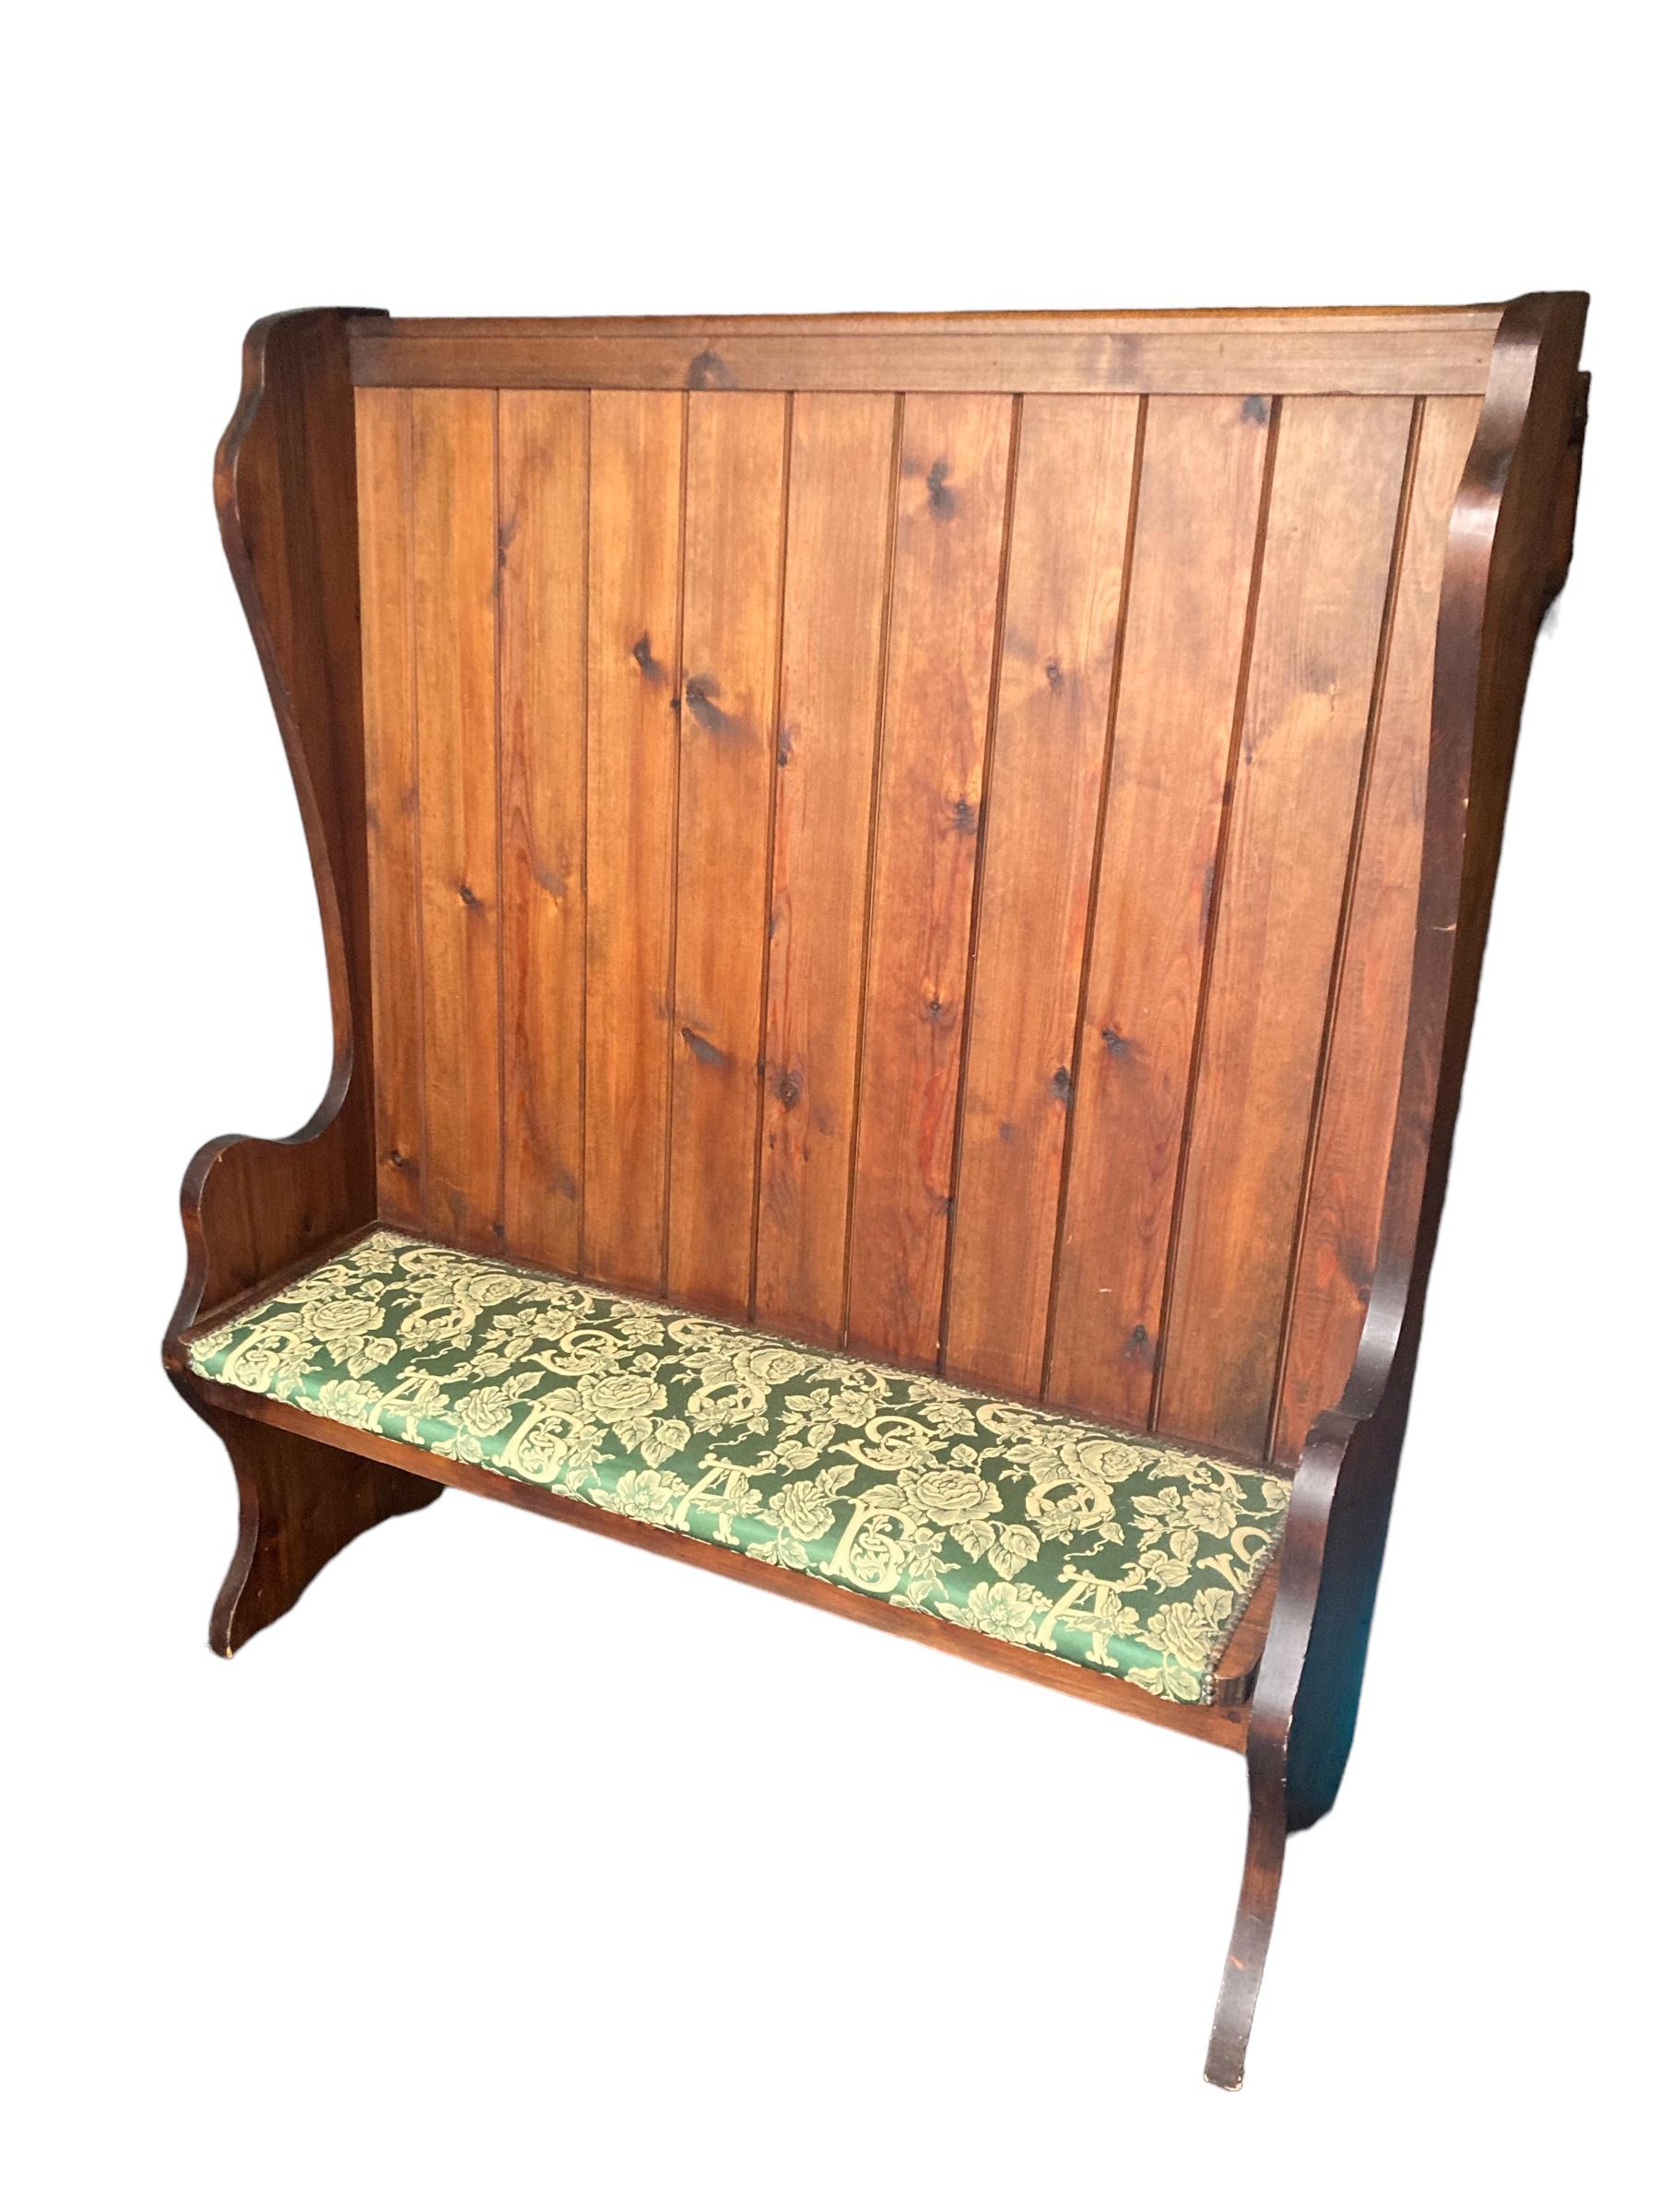 Large High Back Pine Church Pew CIRCA 1920'S. Sating green upholstery decorating with letters and floral design. Crafted with precision and attention to detail, this timeless piece effortlessly combines elegance and functionality. The sturdy pine